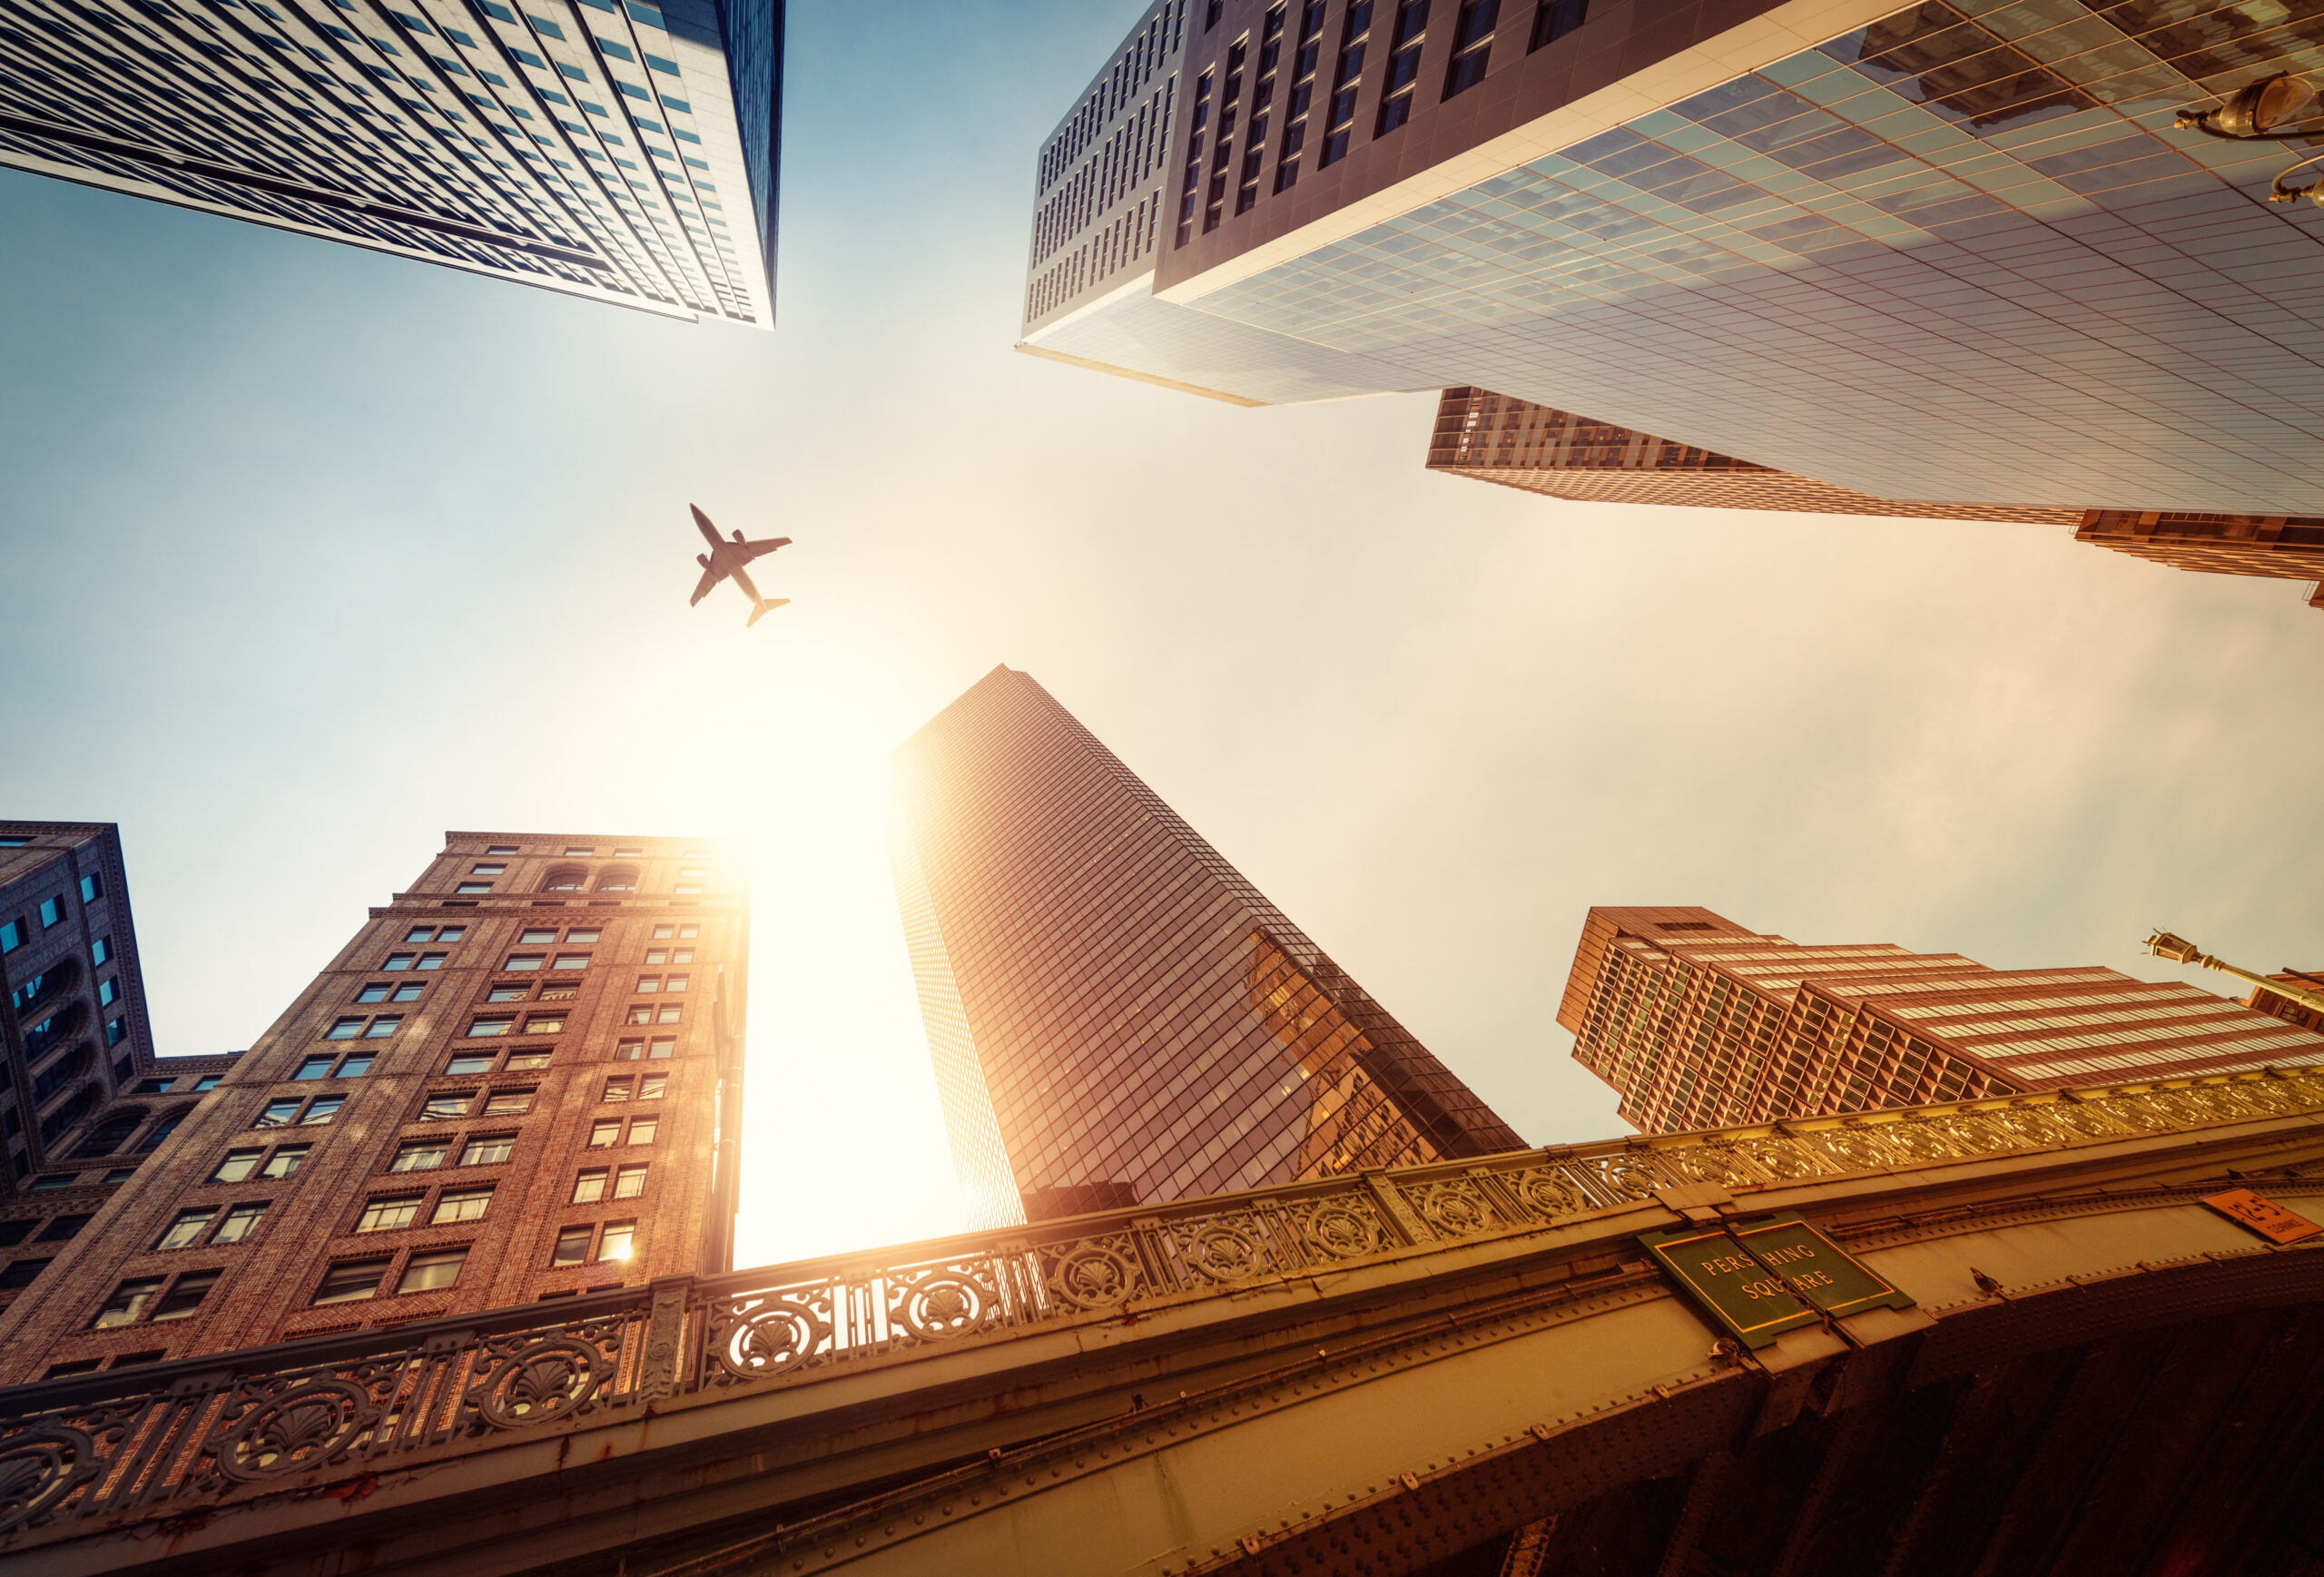 A skyward view of buildings at sunset with a jet plane high above.